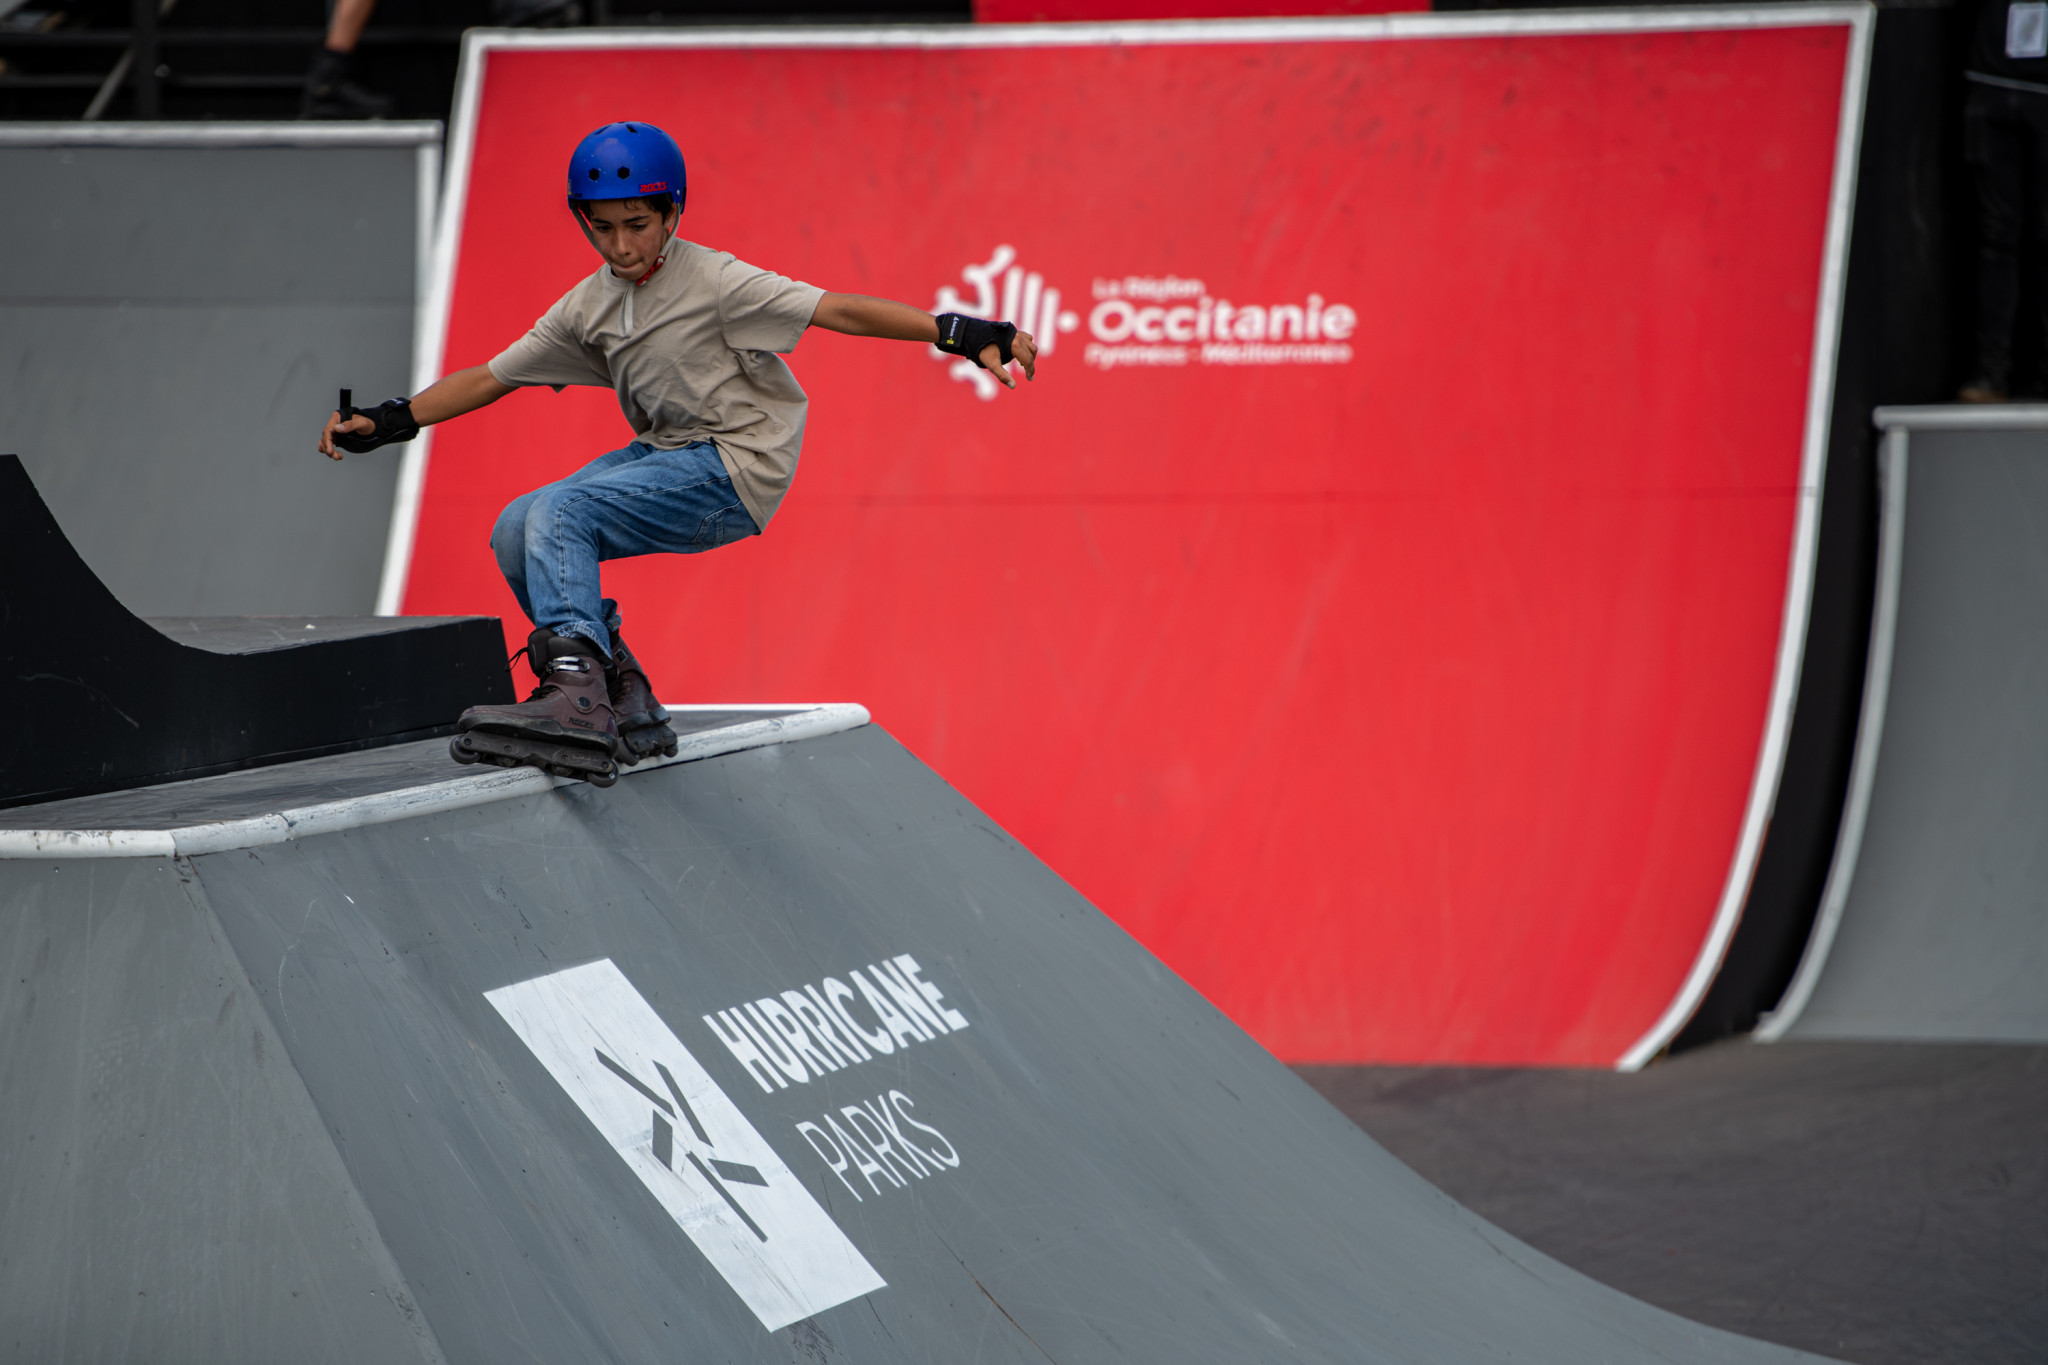 Several urban sports are on the programme at FISE including roller skating, skateboarding, parkour, and BMX freestyle with youth to professional age categories contested ©Hurricane - FISE